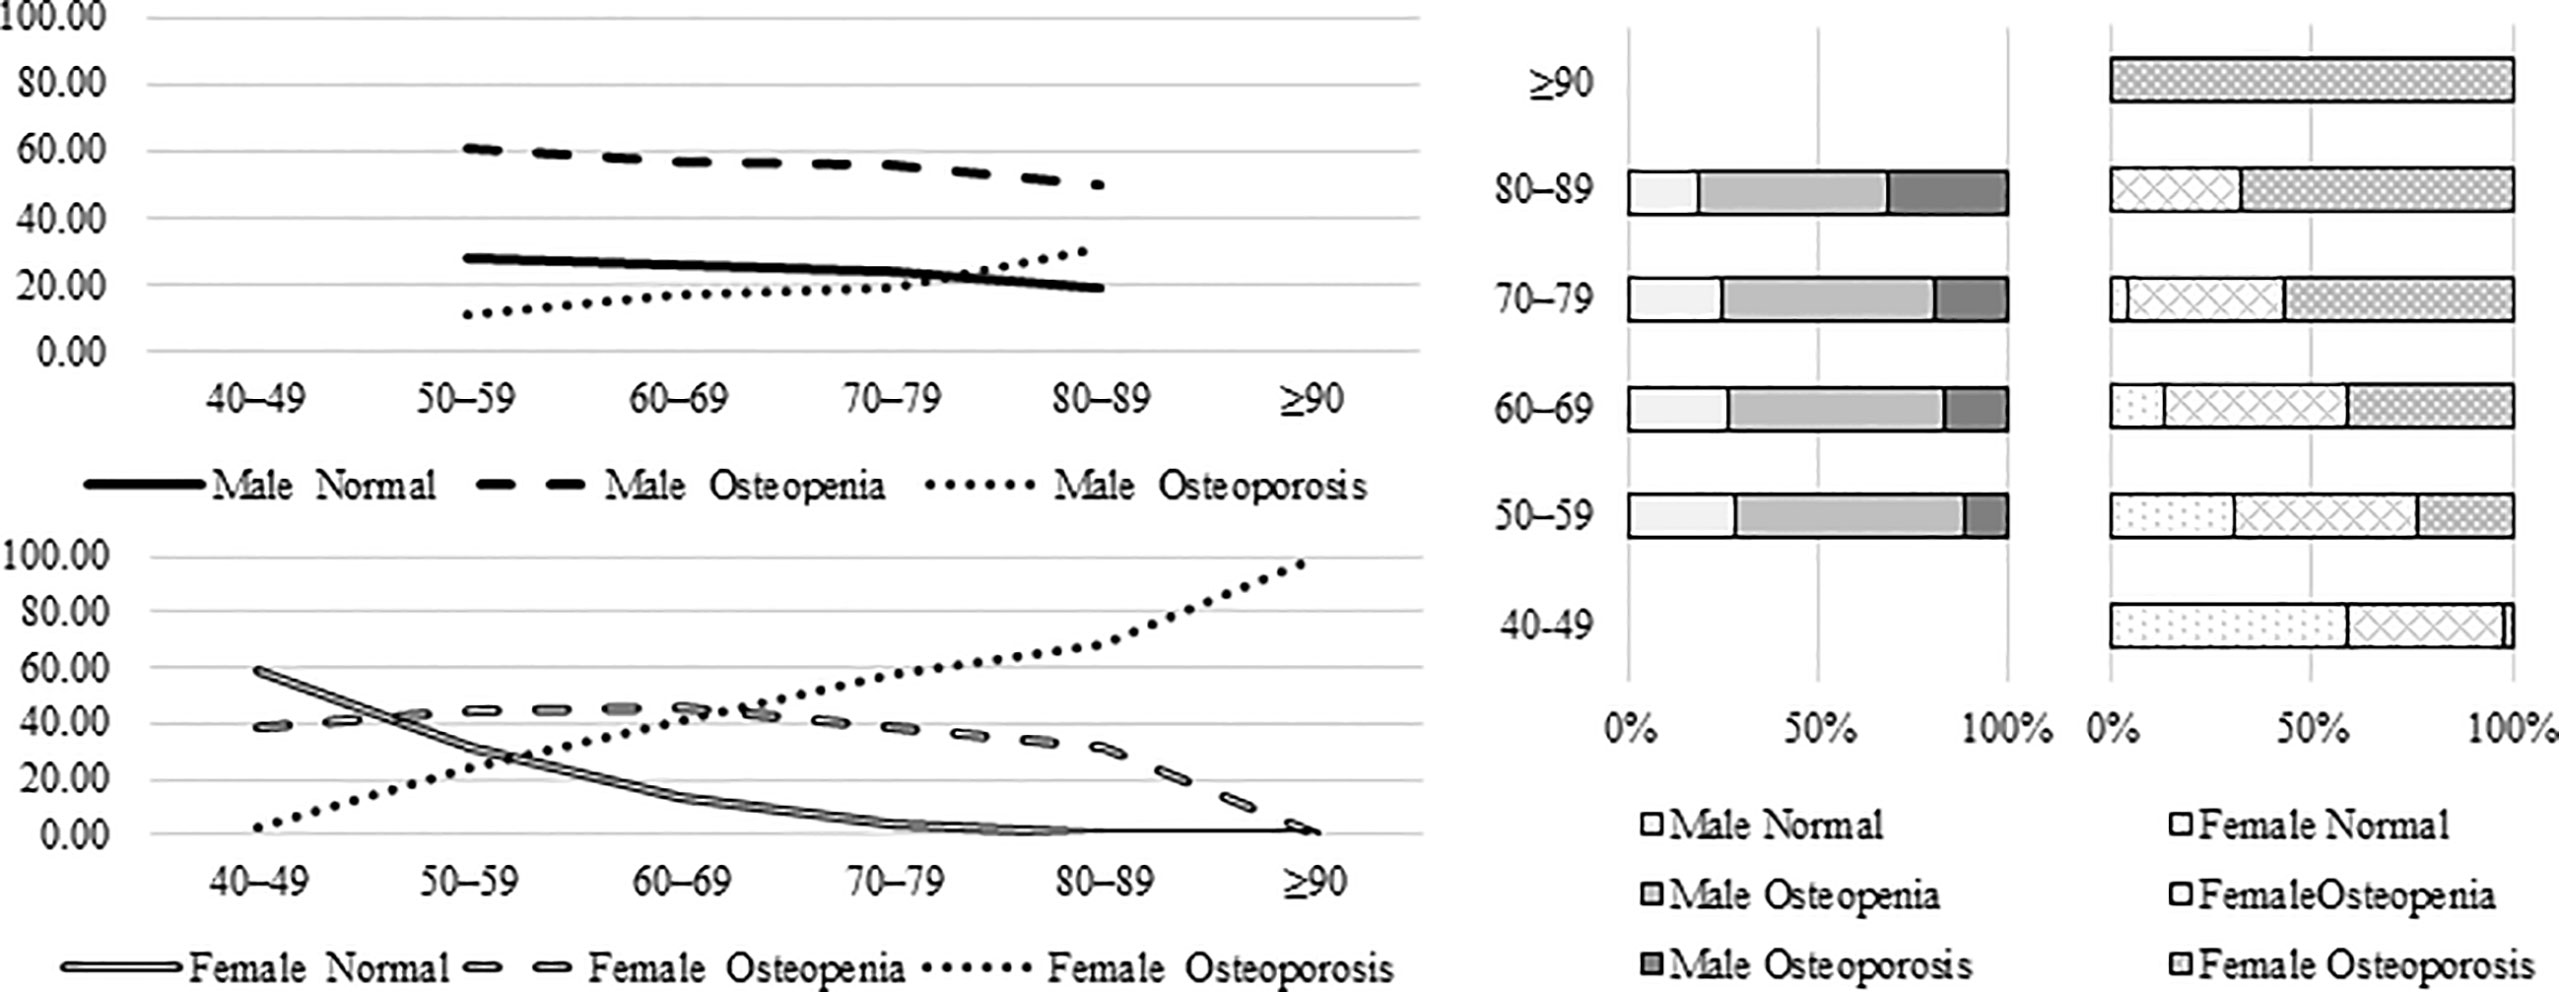 Bone mineral density and lipid profiles in older adults: a nationwide  cross-sectional study